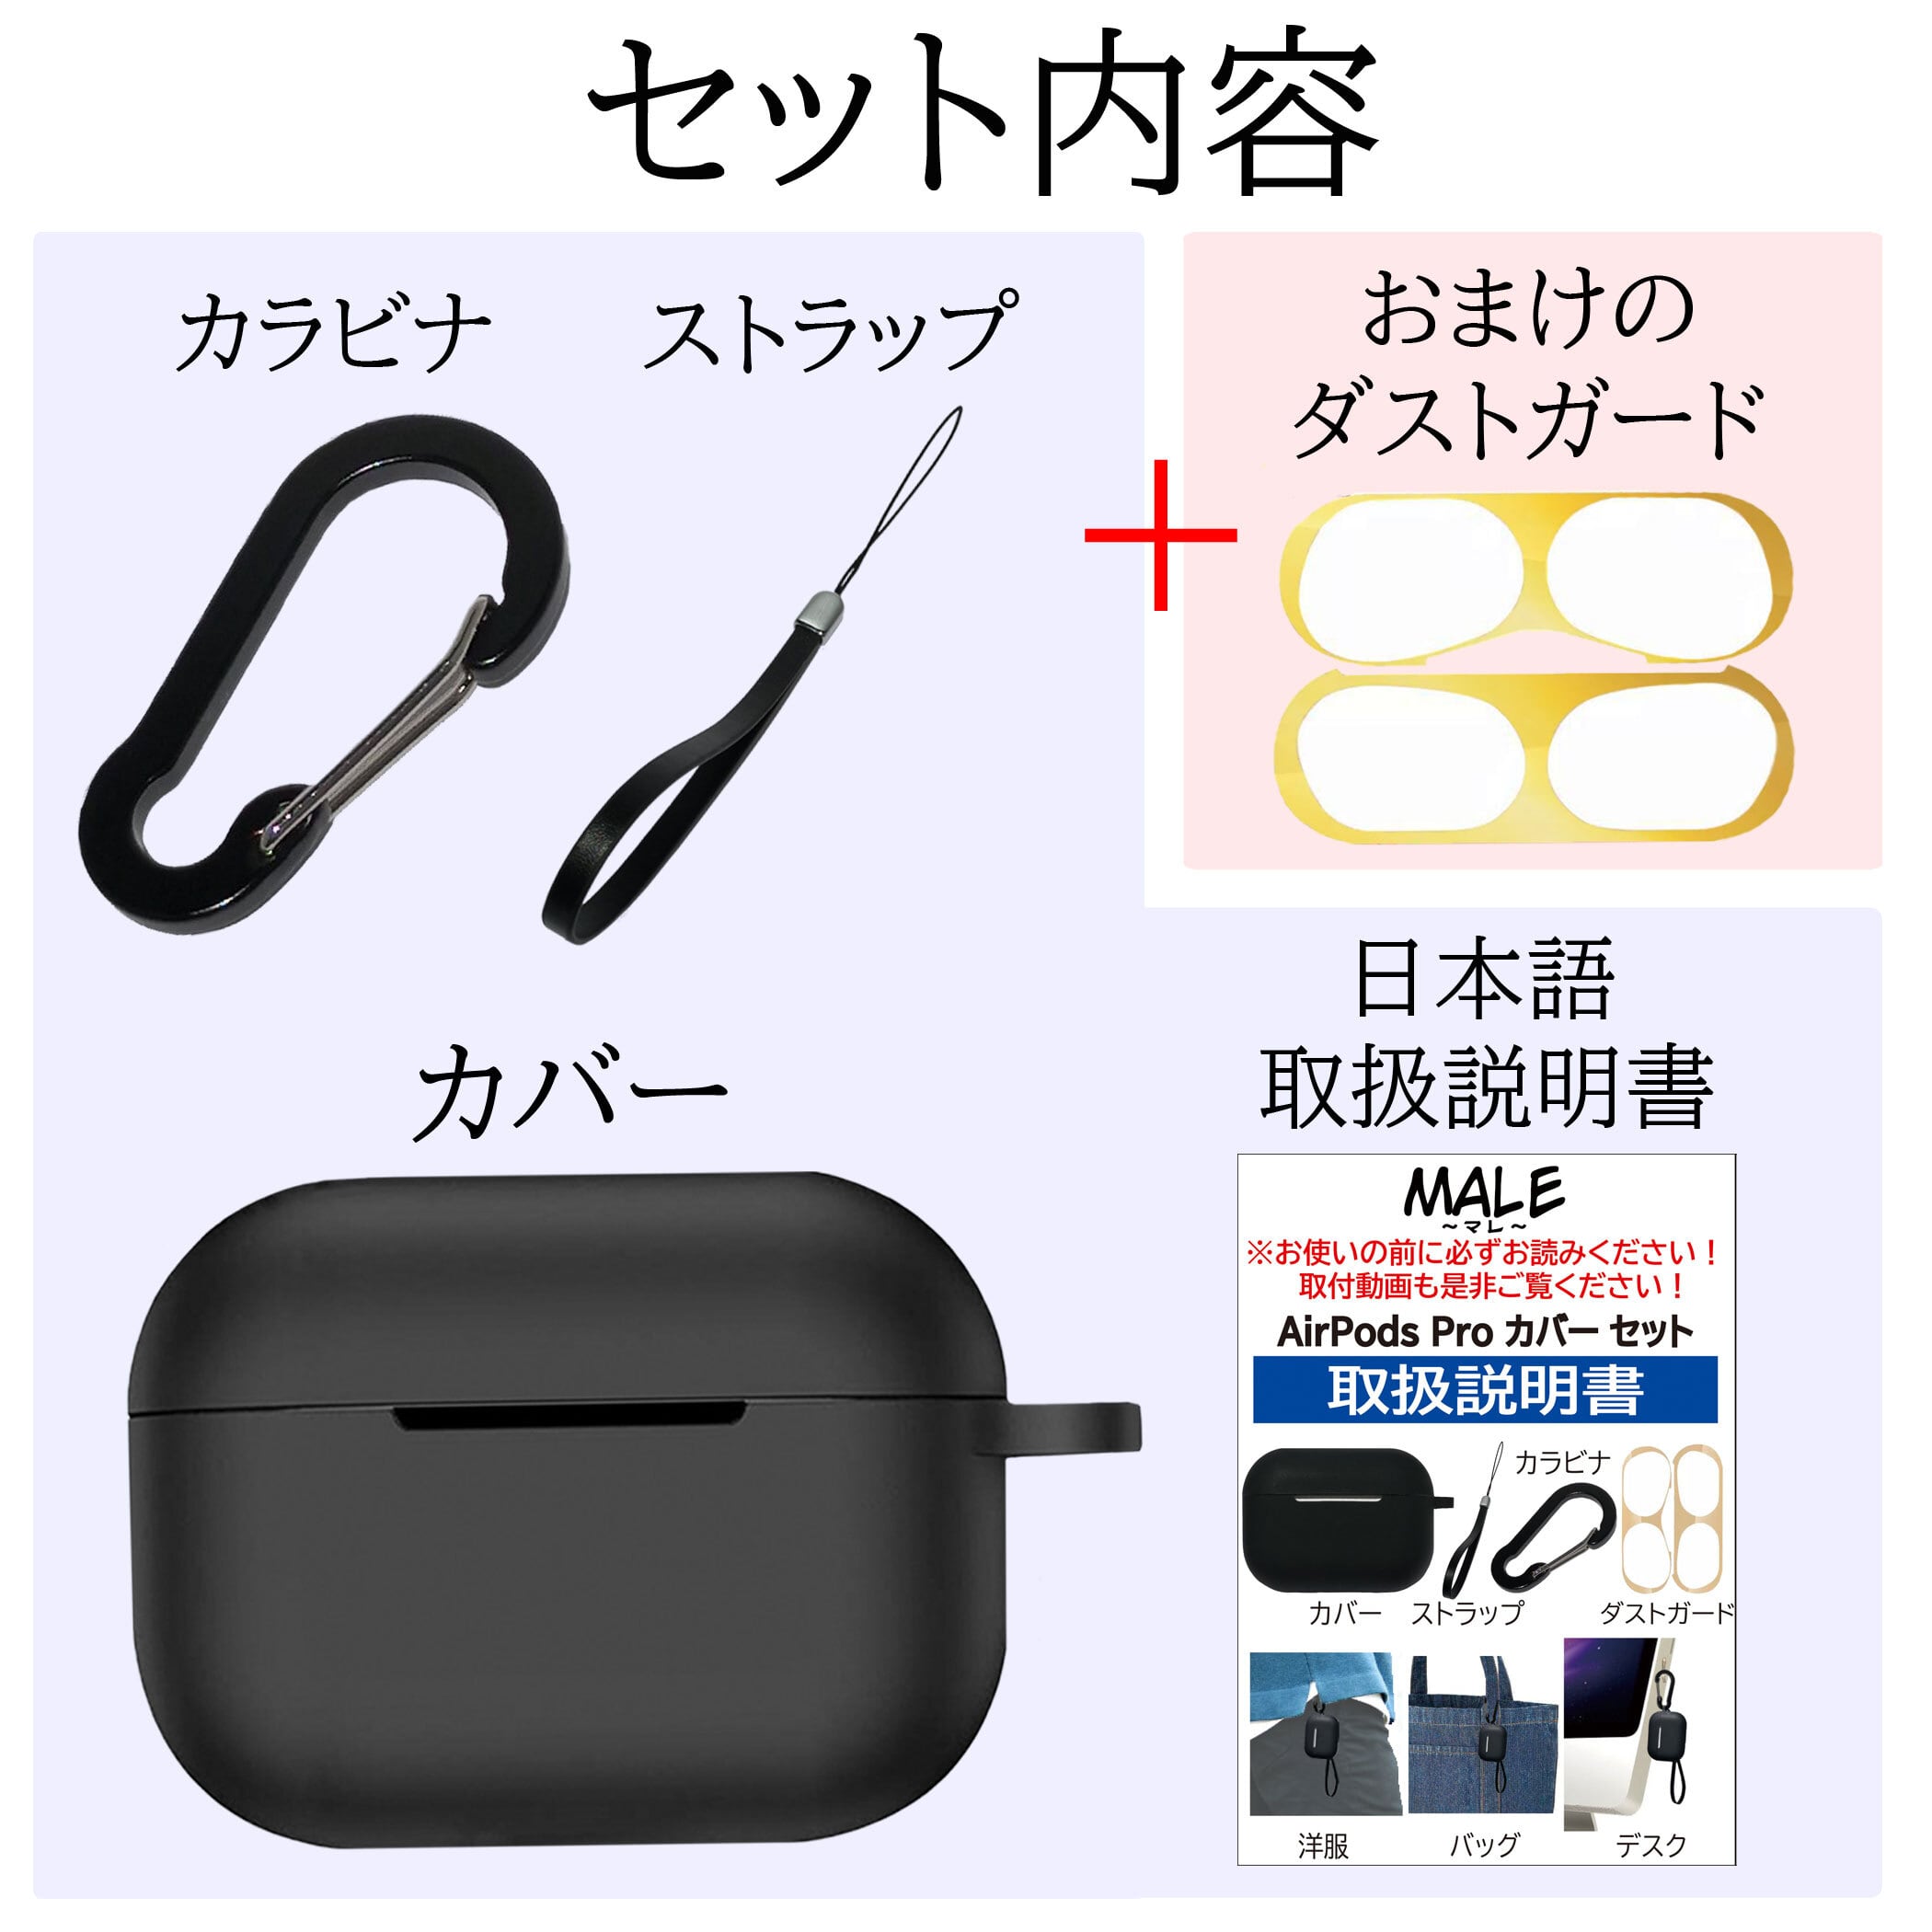 Airpods pro ×3個セット